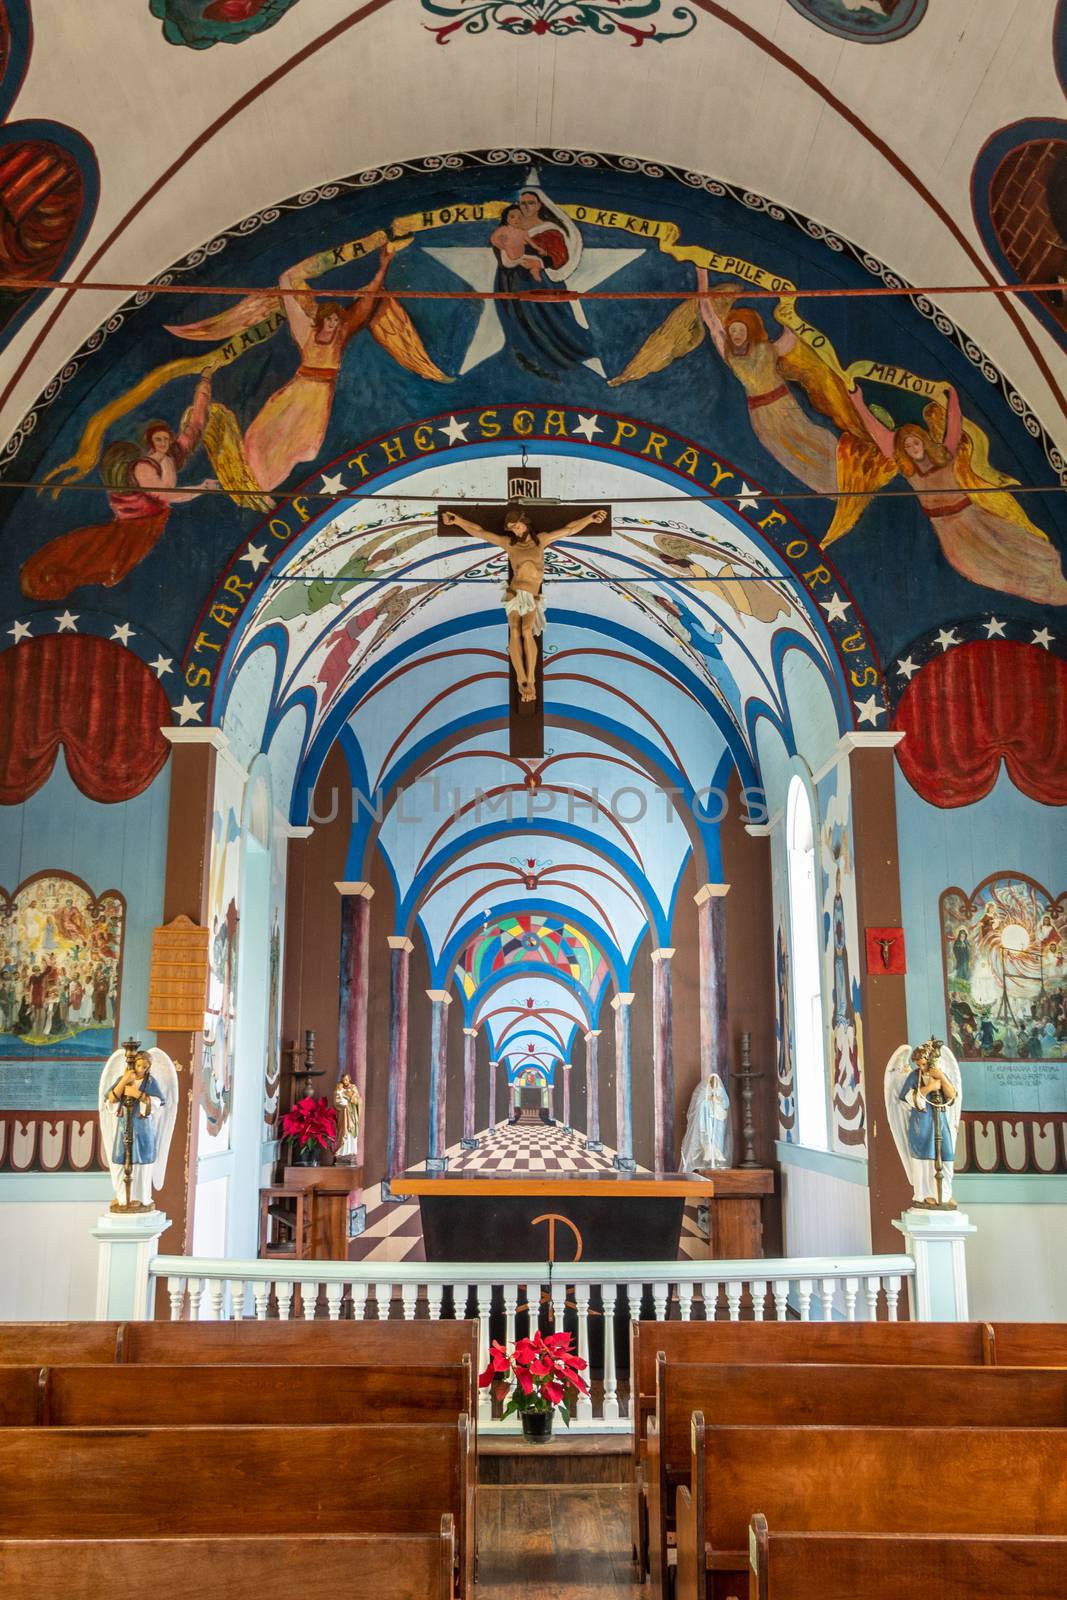 Kalapana, Hawaii, USA. - January 14, 2020: Mary, Star of the Sea Catholic Church. Chancel with altar and back wall painted as a far visual effect. Walls and ceilings adorned with paintings. Large cross.